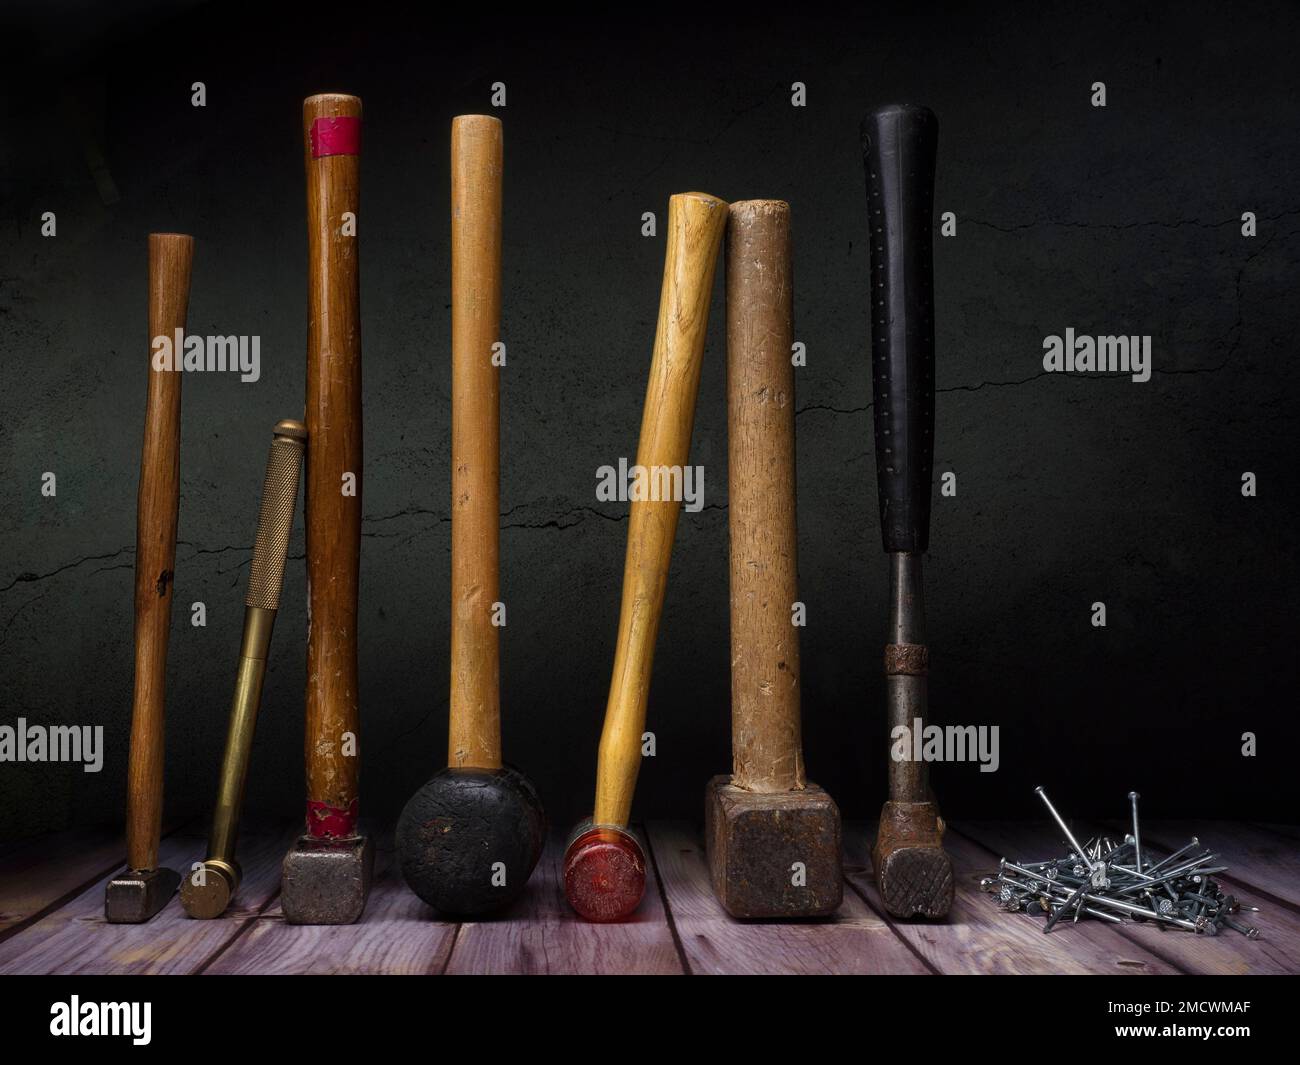 Topic Craft, work, tool, DIY, still life with various hammers and nails, studio shot, symbol photo Stock Photo